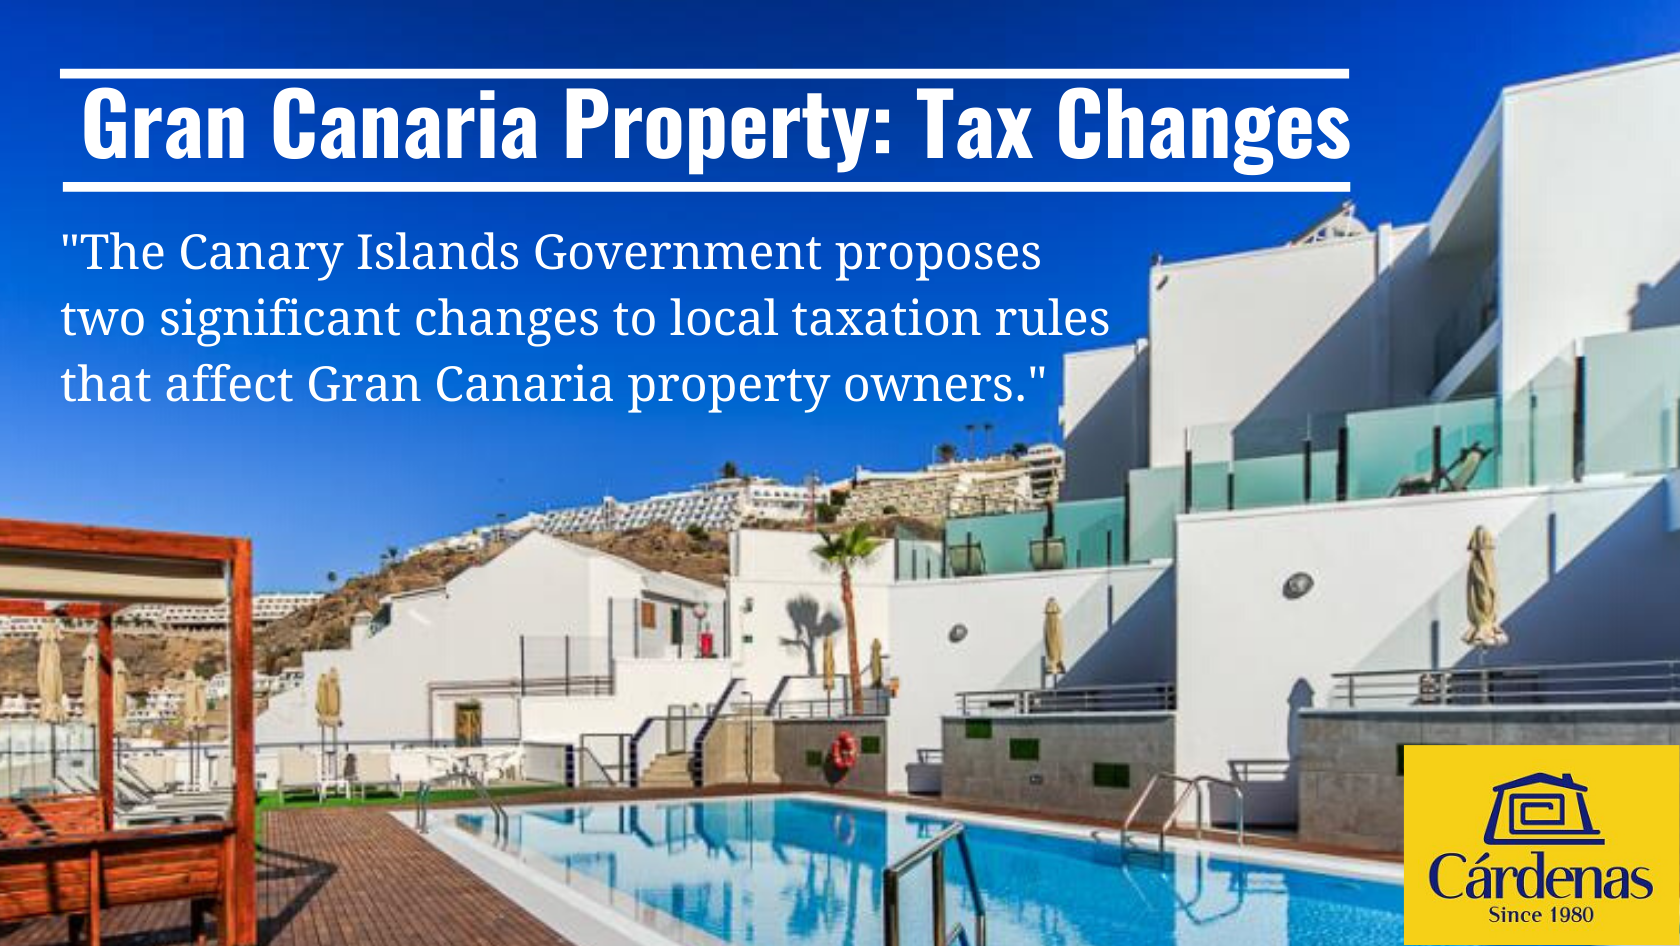 The Canary Islands Government proposes two significant changes to local taxation rules that affect Gran Canaria property owners.|The Canary Islands Government announces two significant changes to local VAT andf inheritance tax rules that affect Gran Canaria property owners.